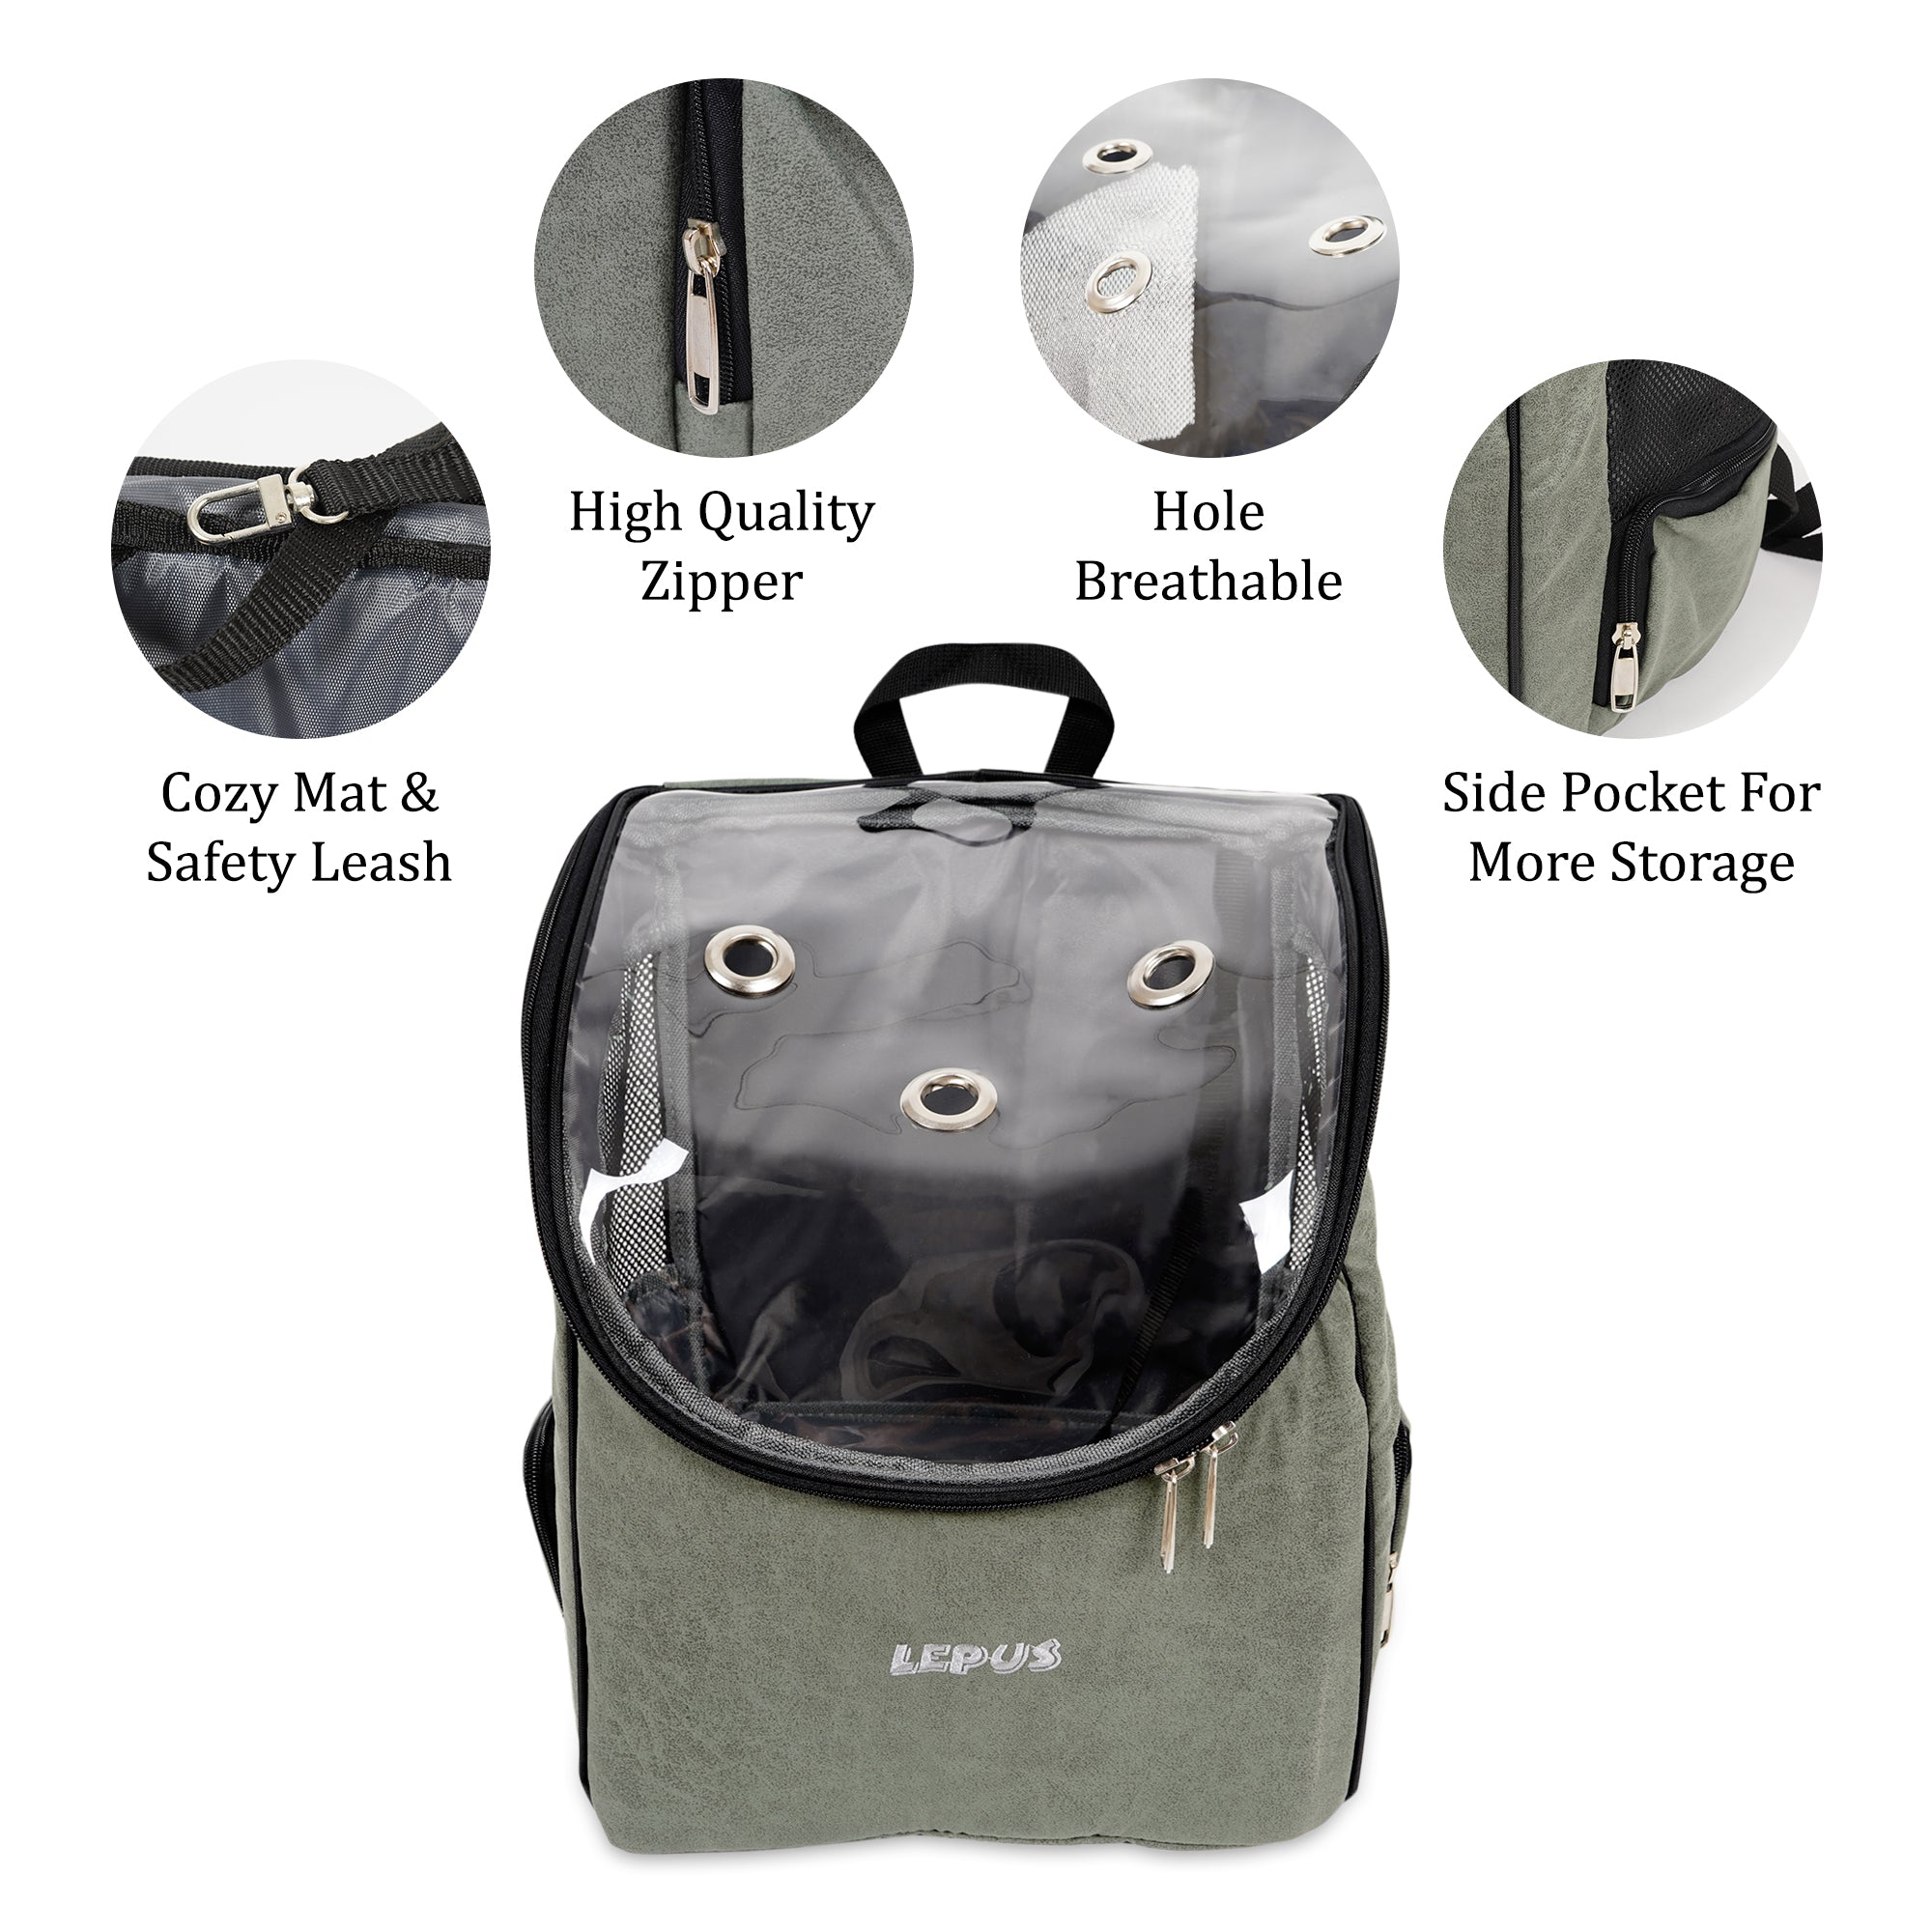 Airline Approved Dog and Cat Backpack Carrier for Small Dogs - Water, Stain Proof Dog Hiking Backpack with Mesh Cover, Waist Belt - GREEN-LEATHER